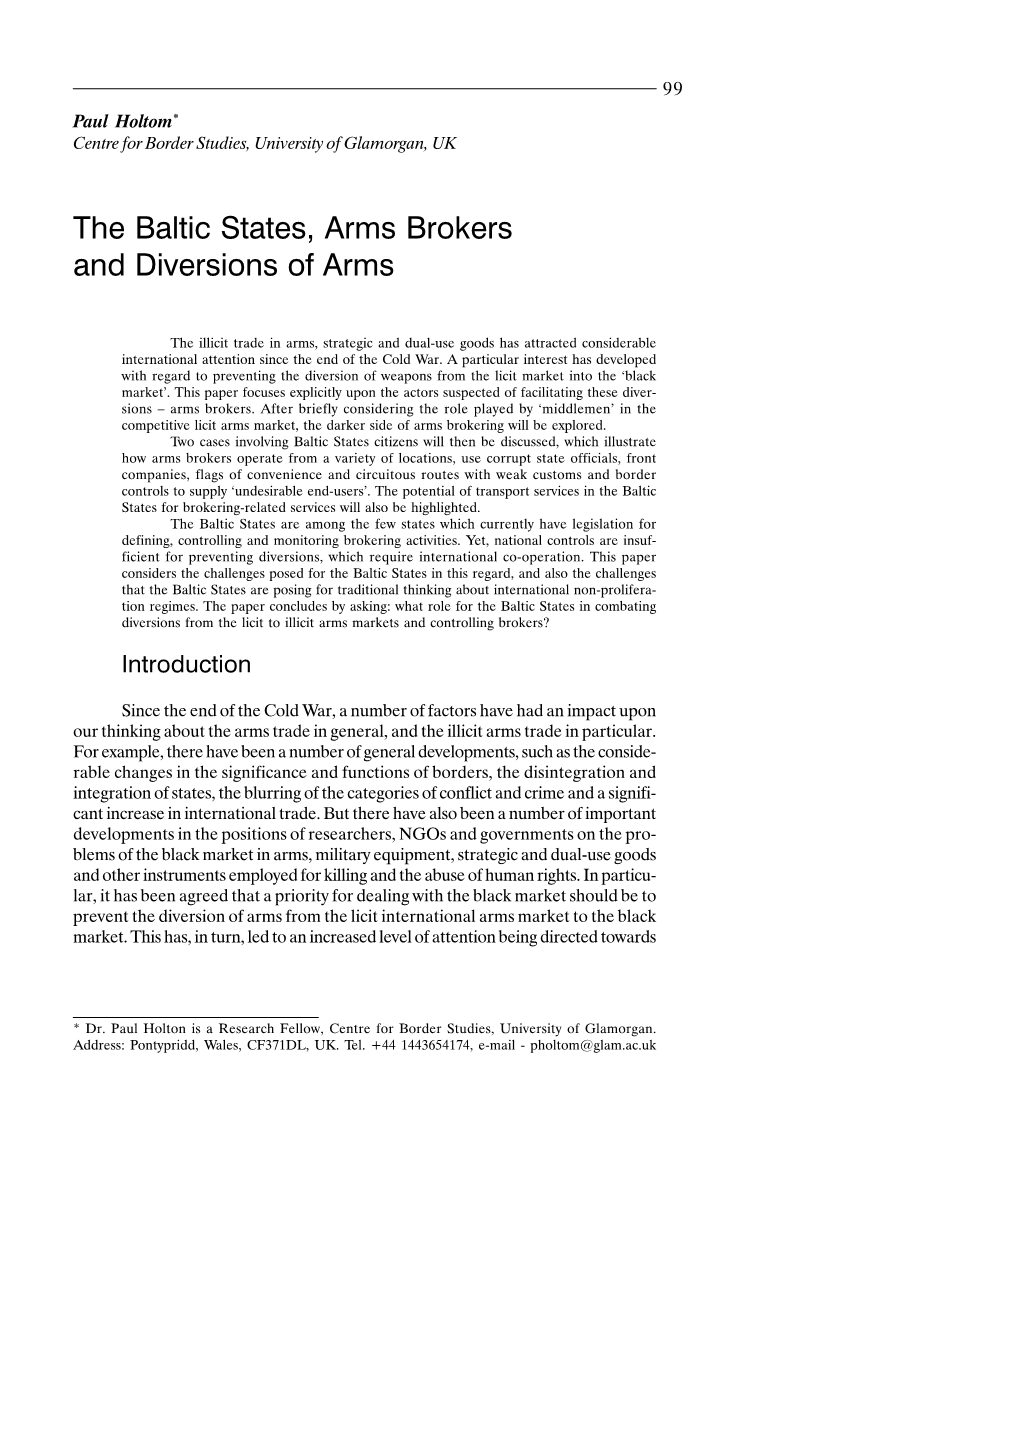 The Baltic States, Arms Brokers and Diversions of Arms